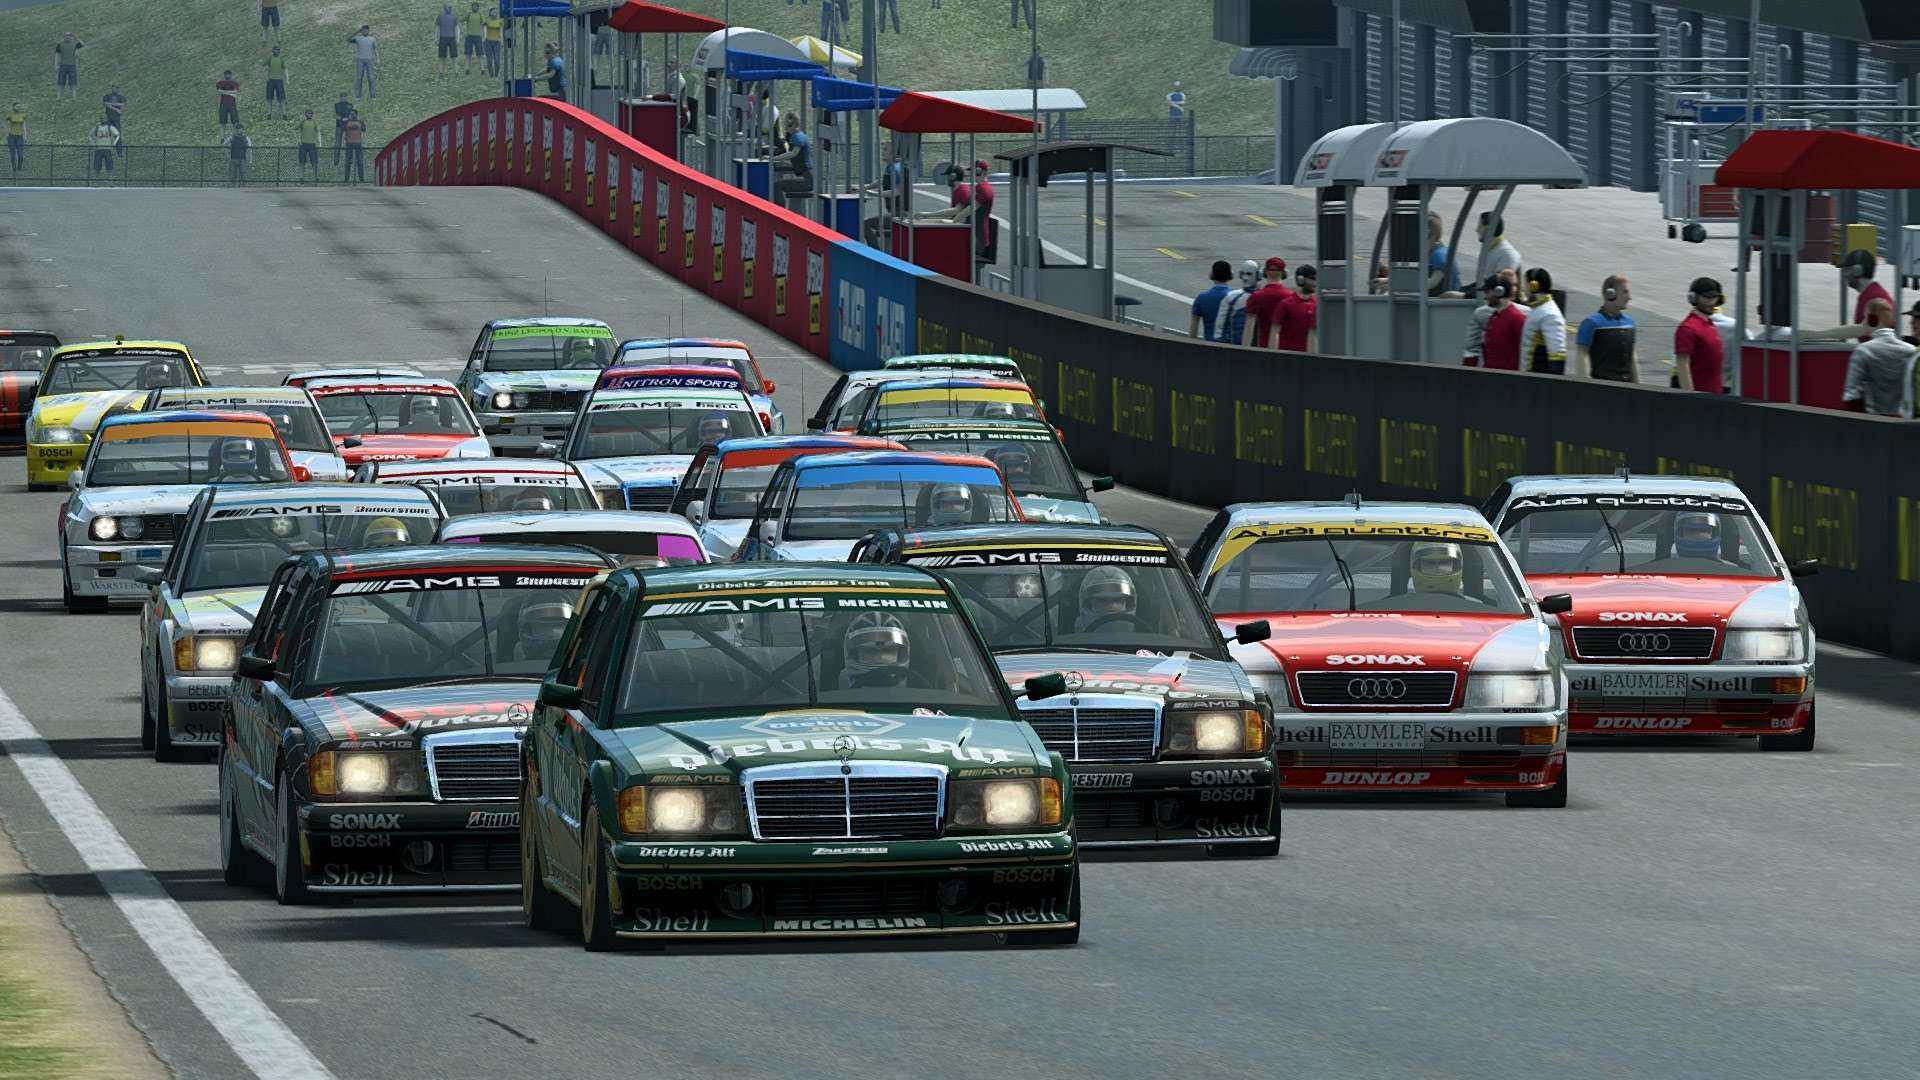 7 game mods. DTM 1992. Квали кар DTM 1992. ДТМ 1992 год.. RFACTOR 1987.